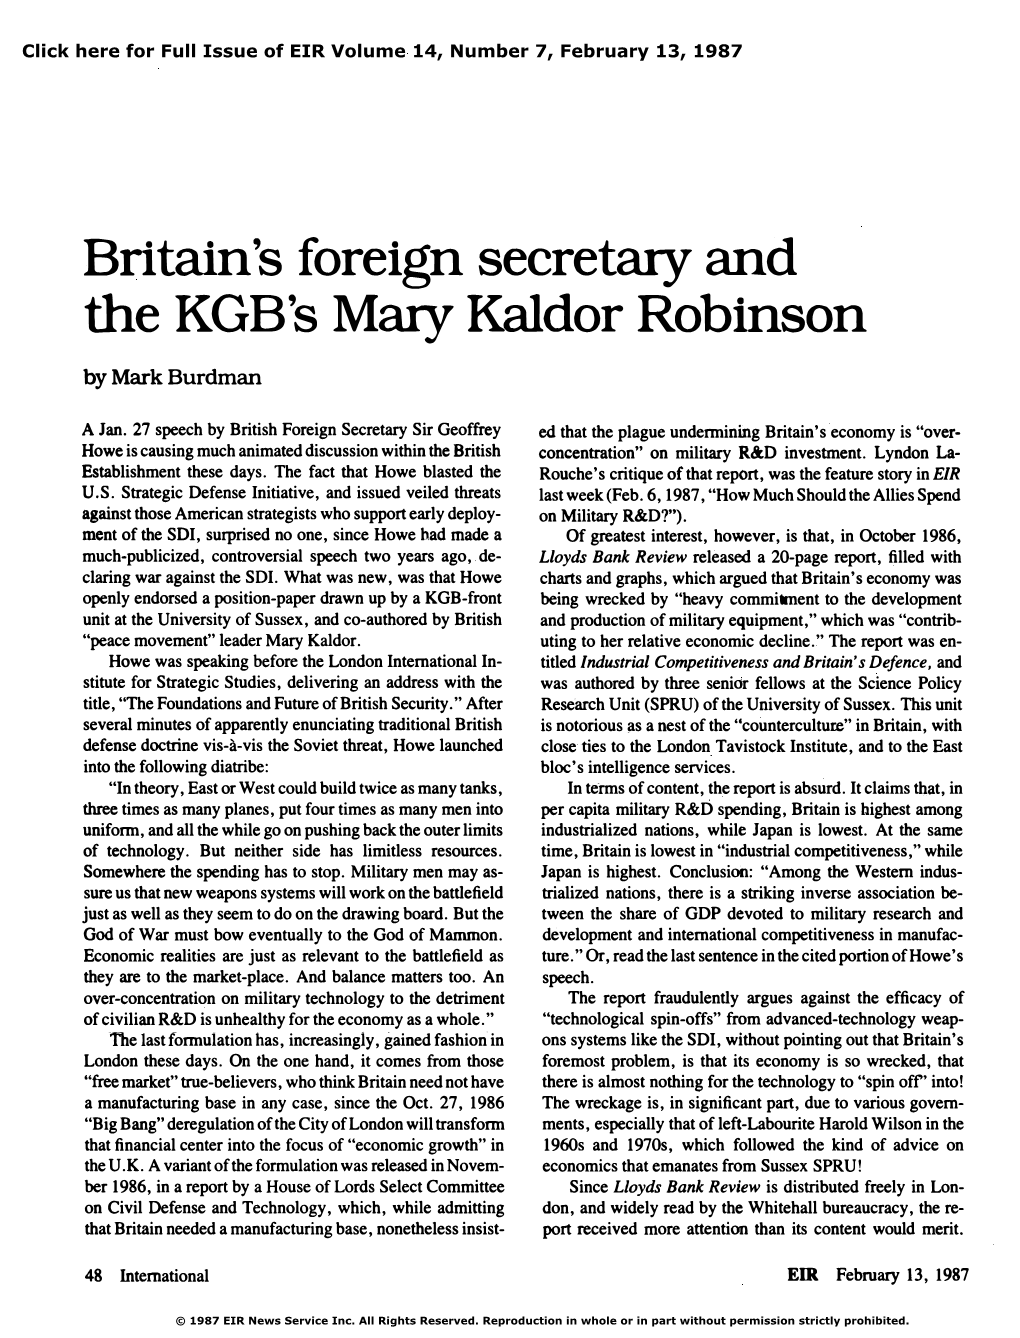 Britain's Foreign Secretary and the KGB's Mary Kaldor Robinson